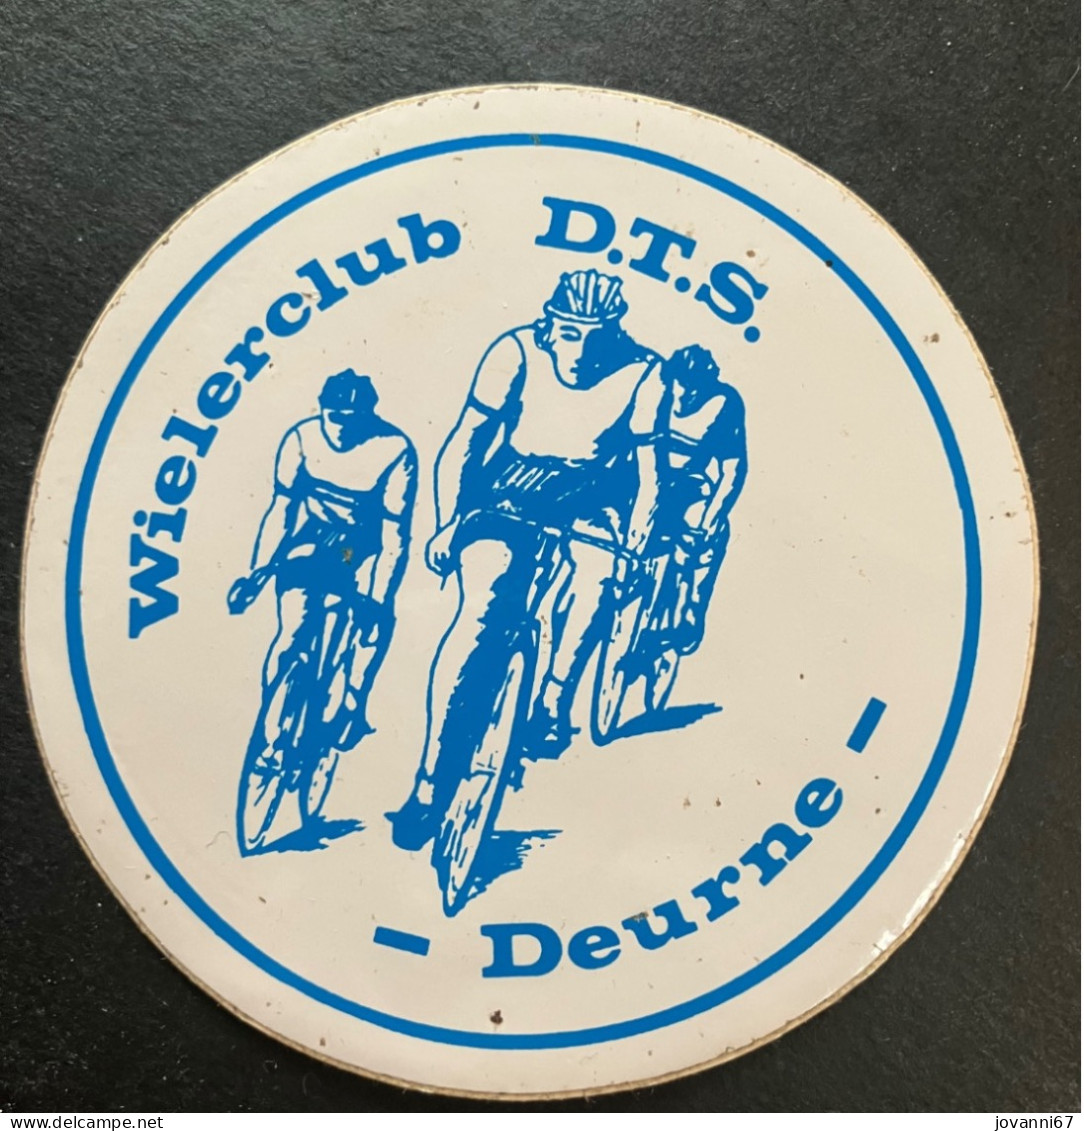 DTS Deurne  - Sticker - Cyclisme - Ciclismo -wielrennen - Cycling